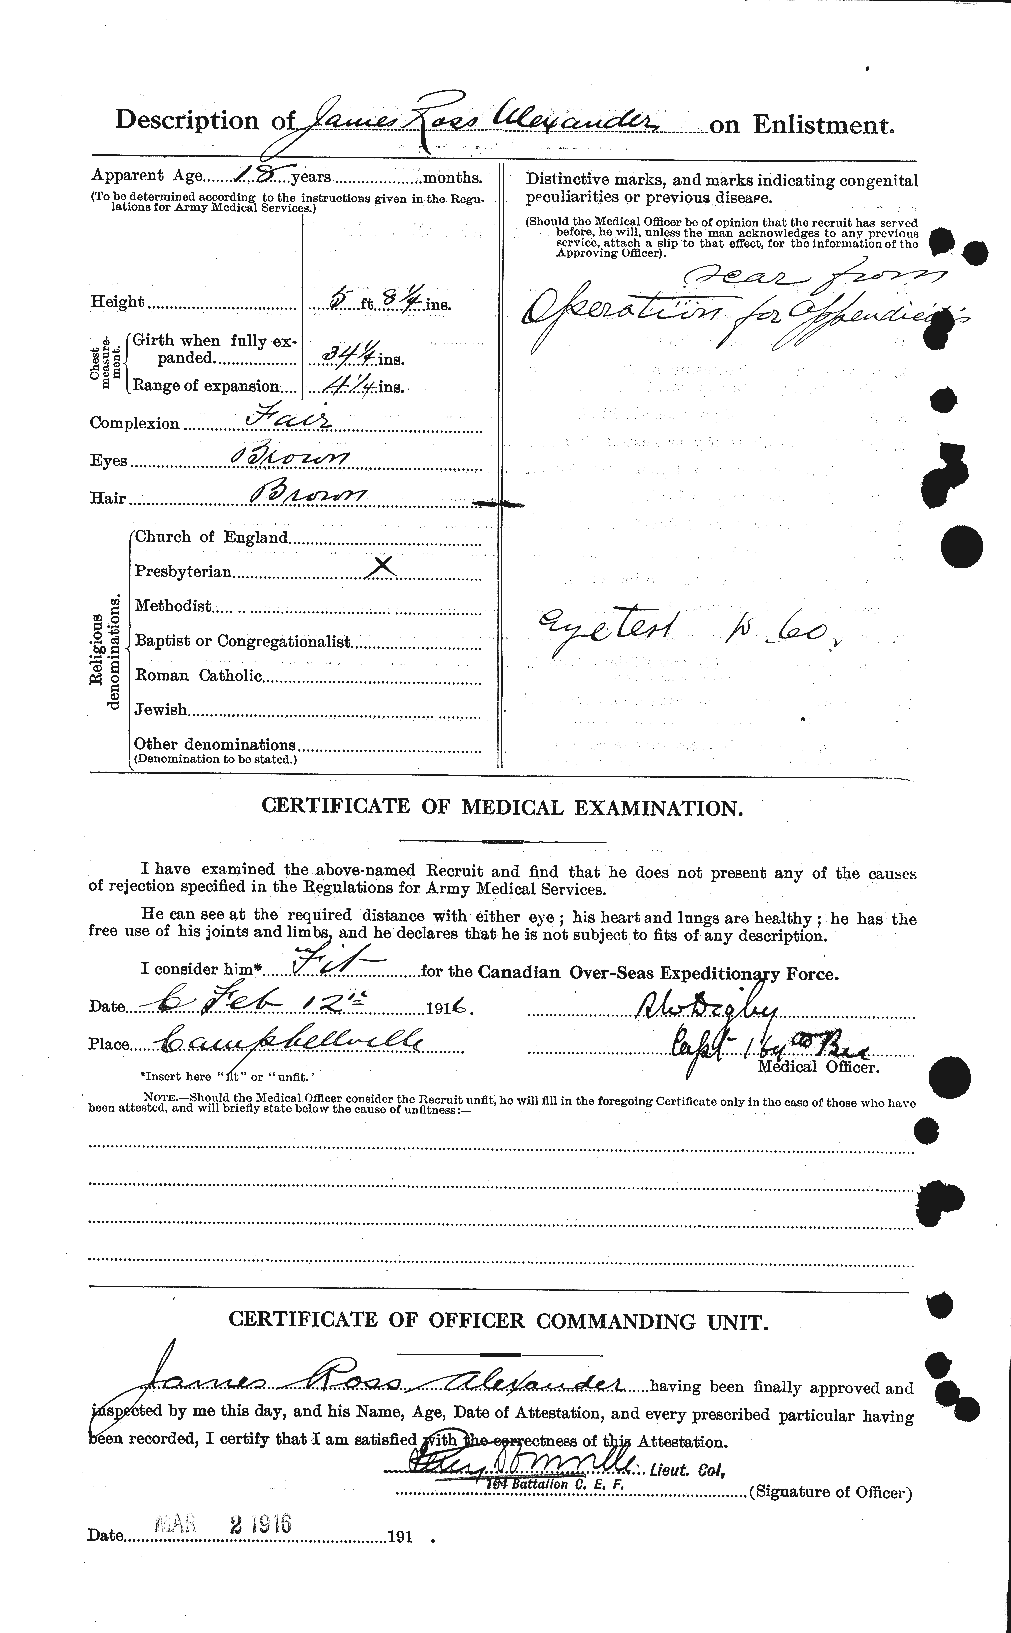 Personnel Records of the First World War - CEF 204075b